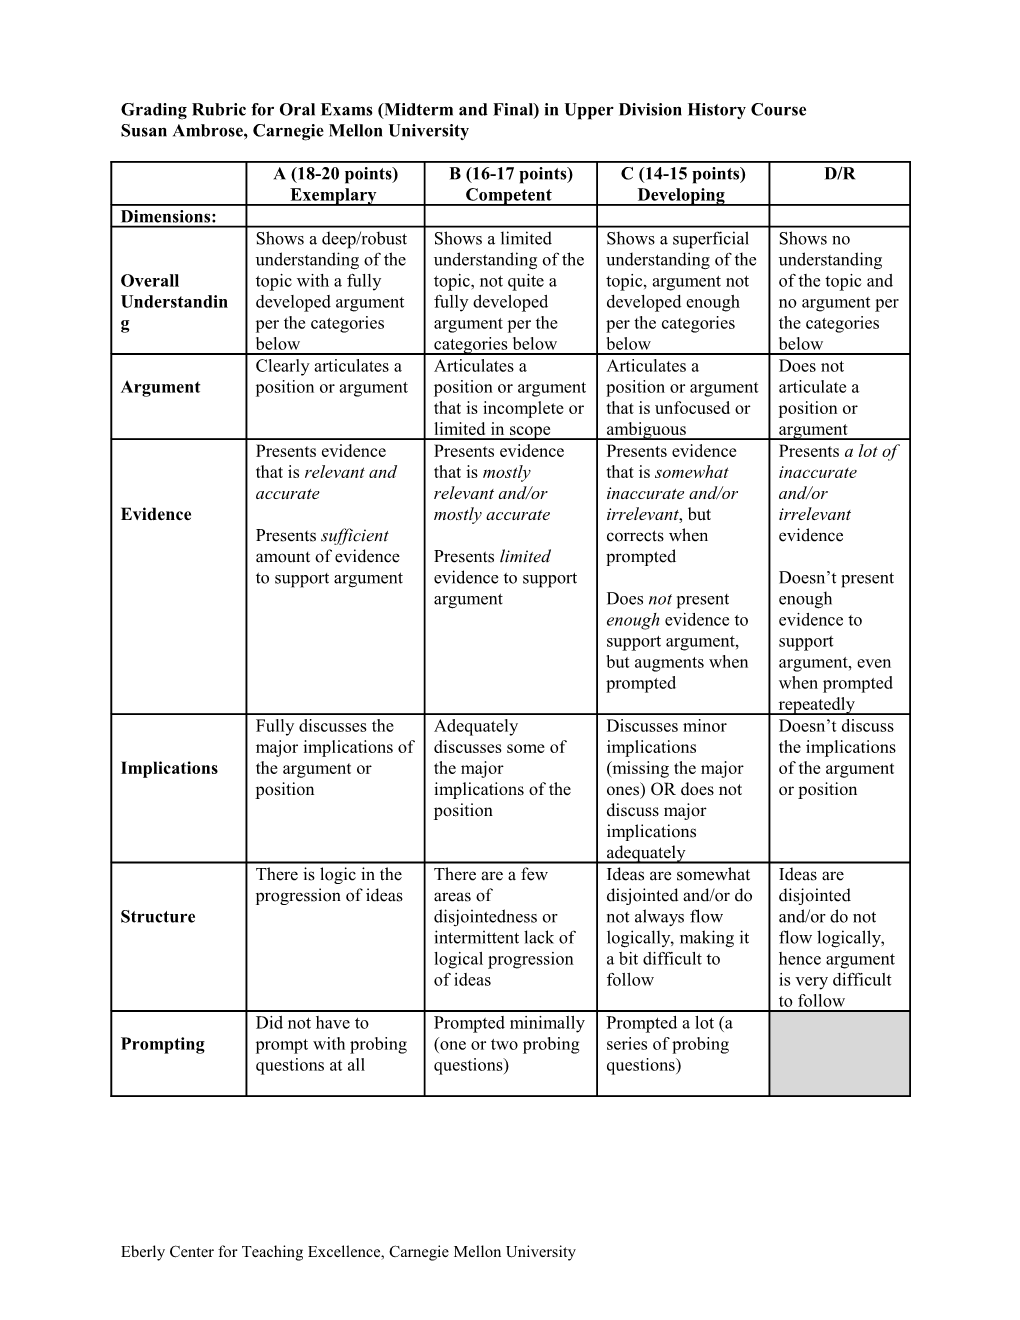 Grading Rubric for Oral Exams (Midterm and Final) in Upper Division History Course